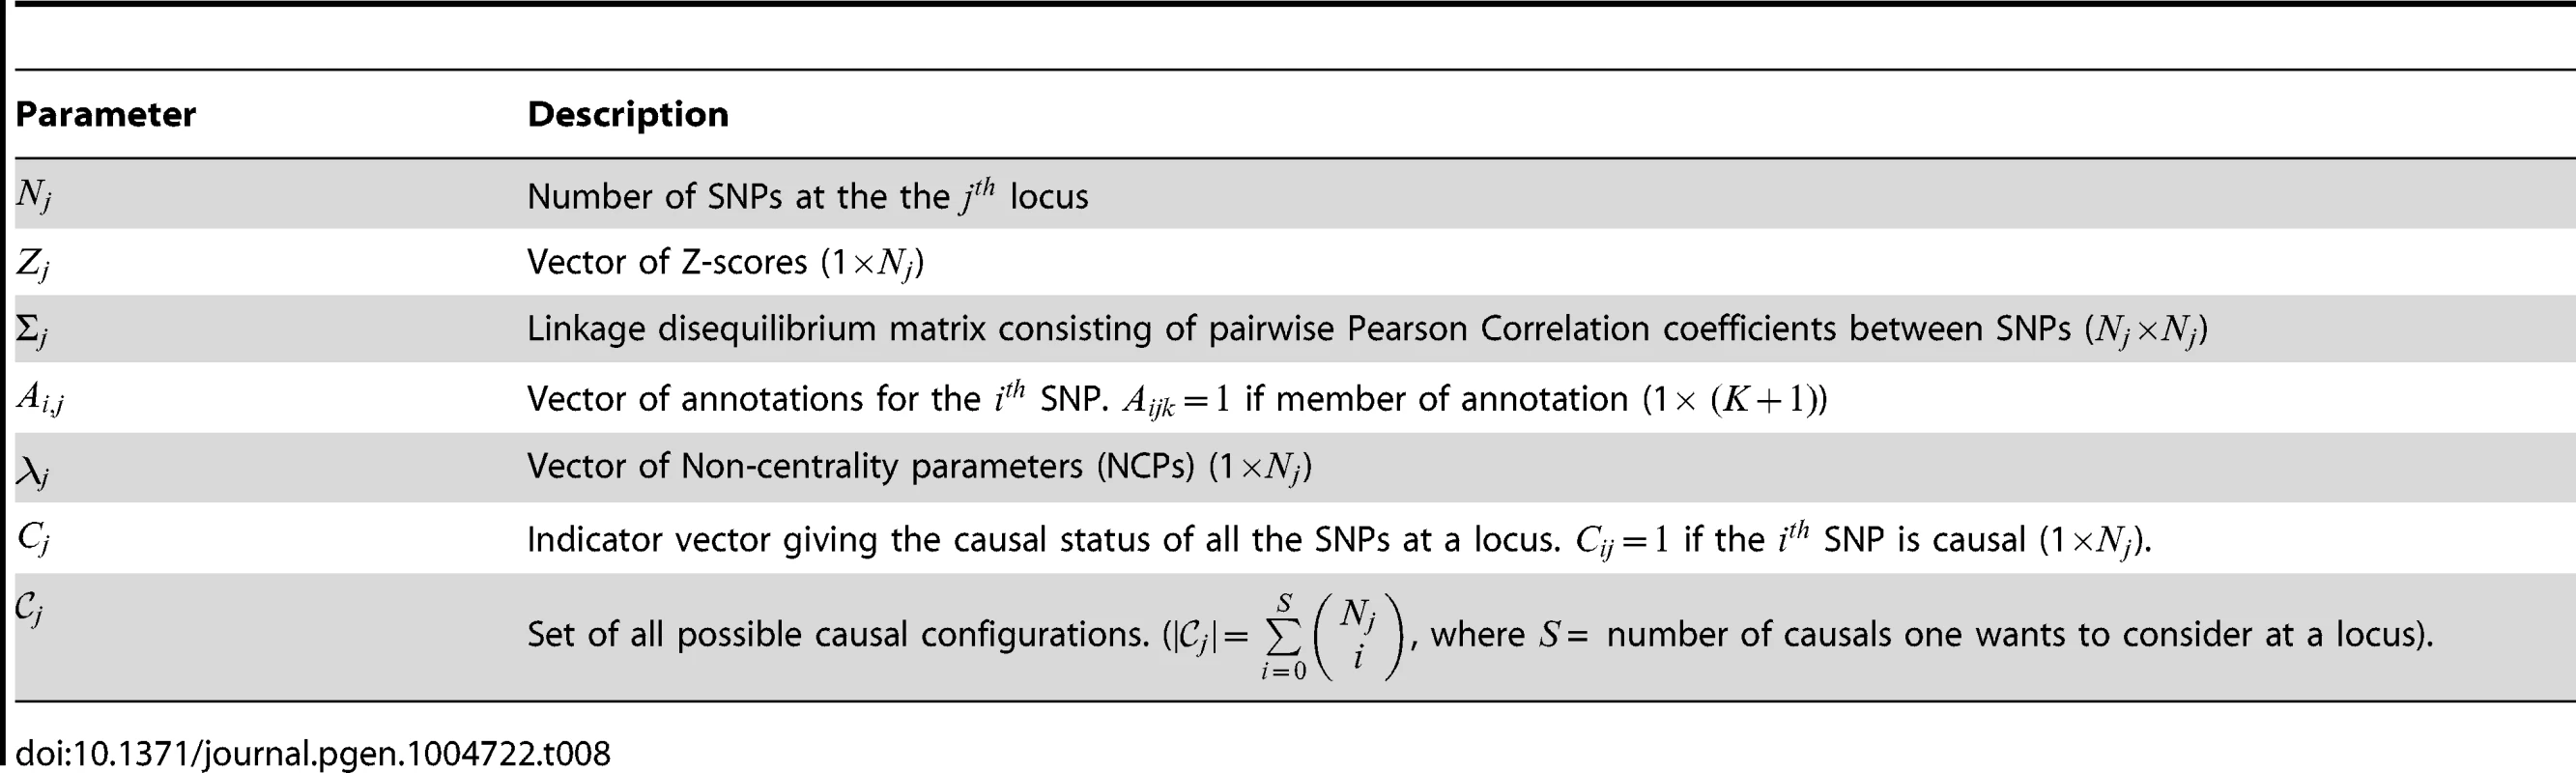 List of model parameters for the  locus  where L is the total number of fine-mapping loci).